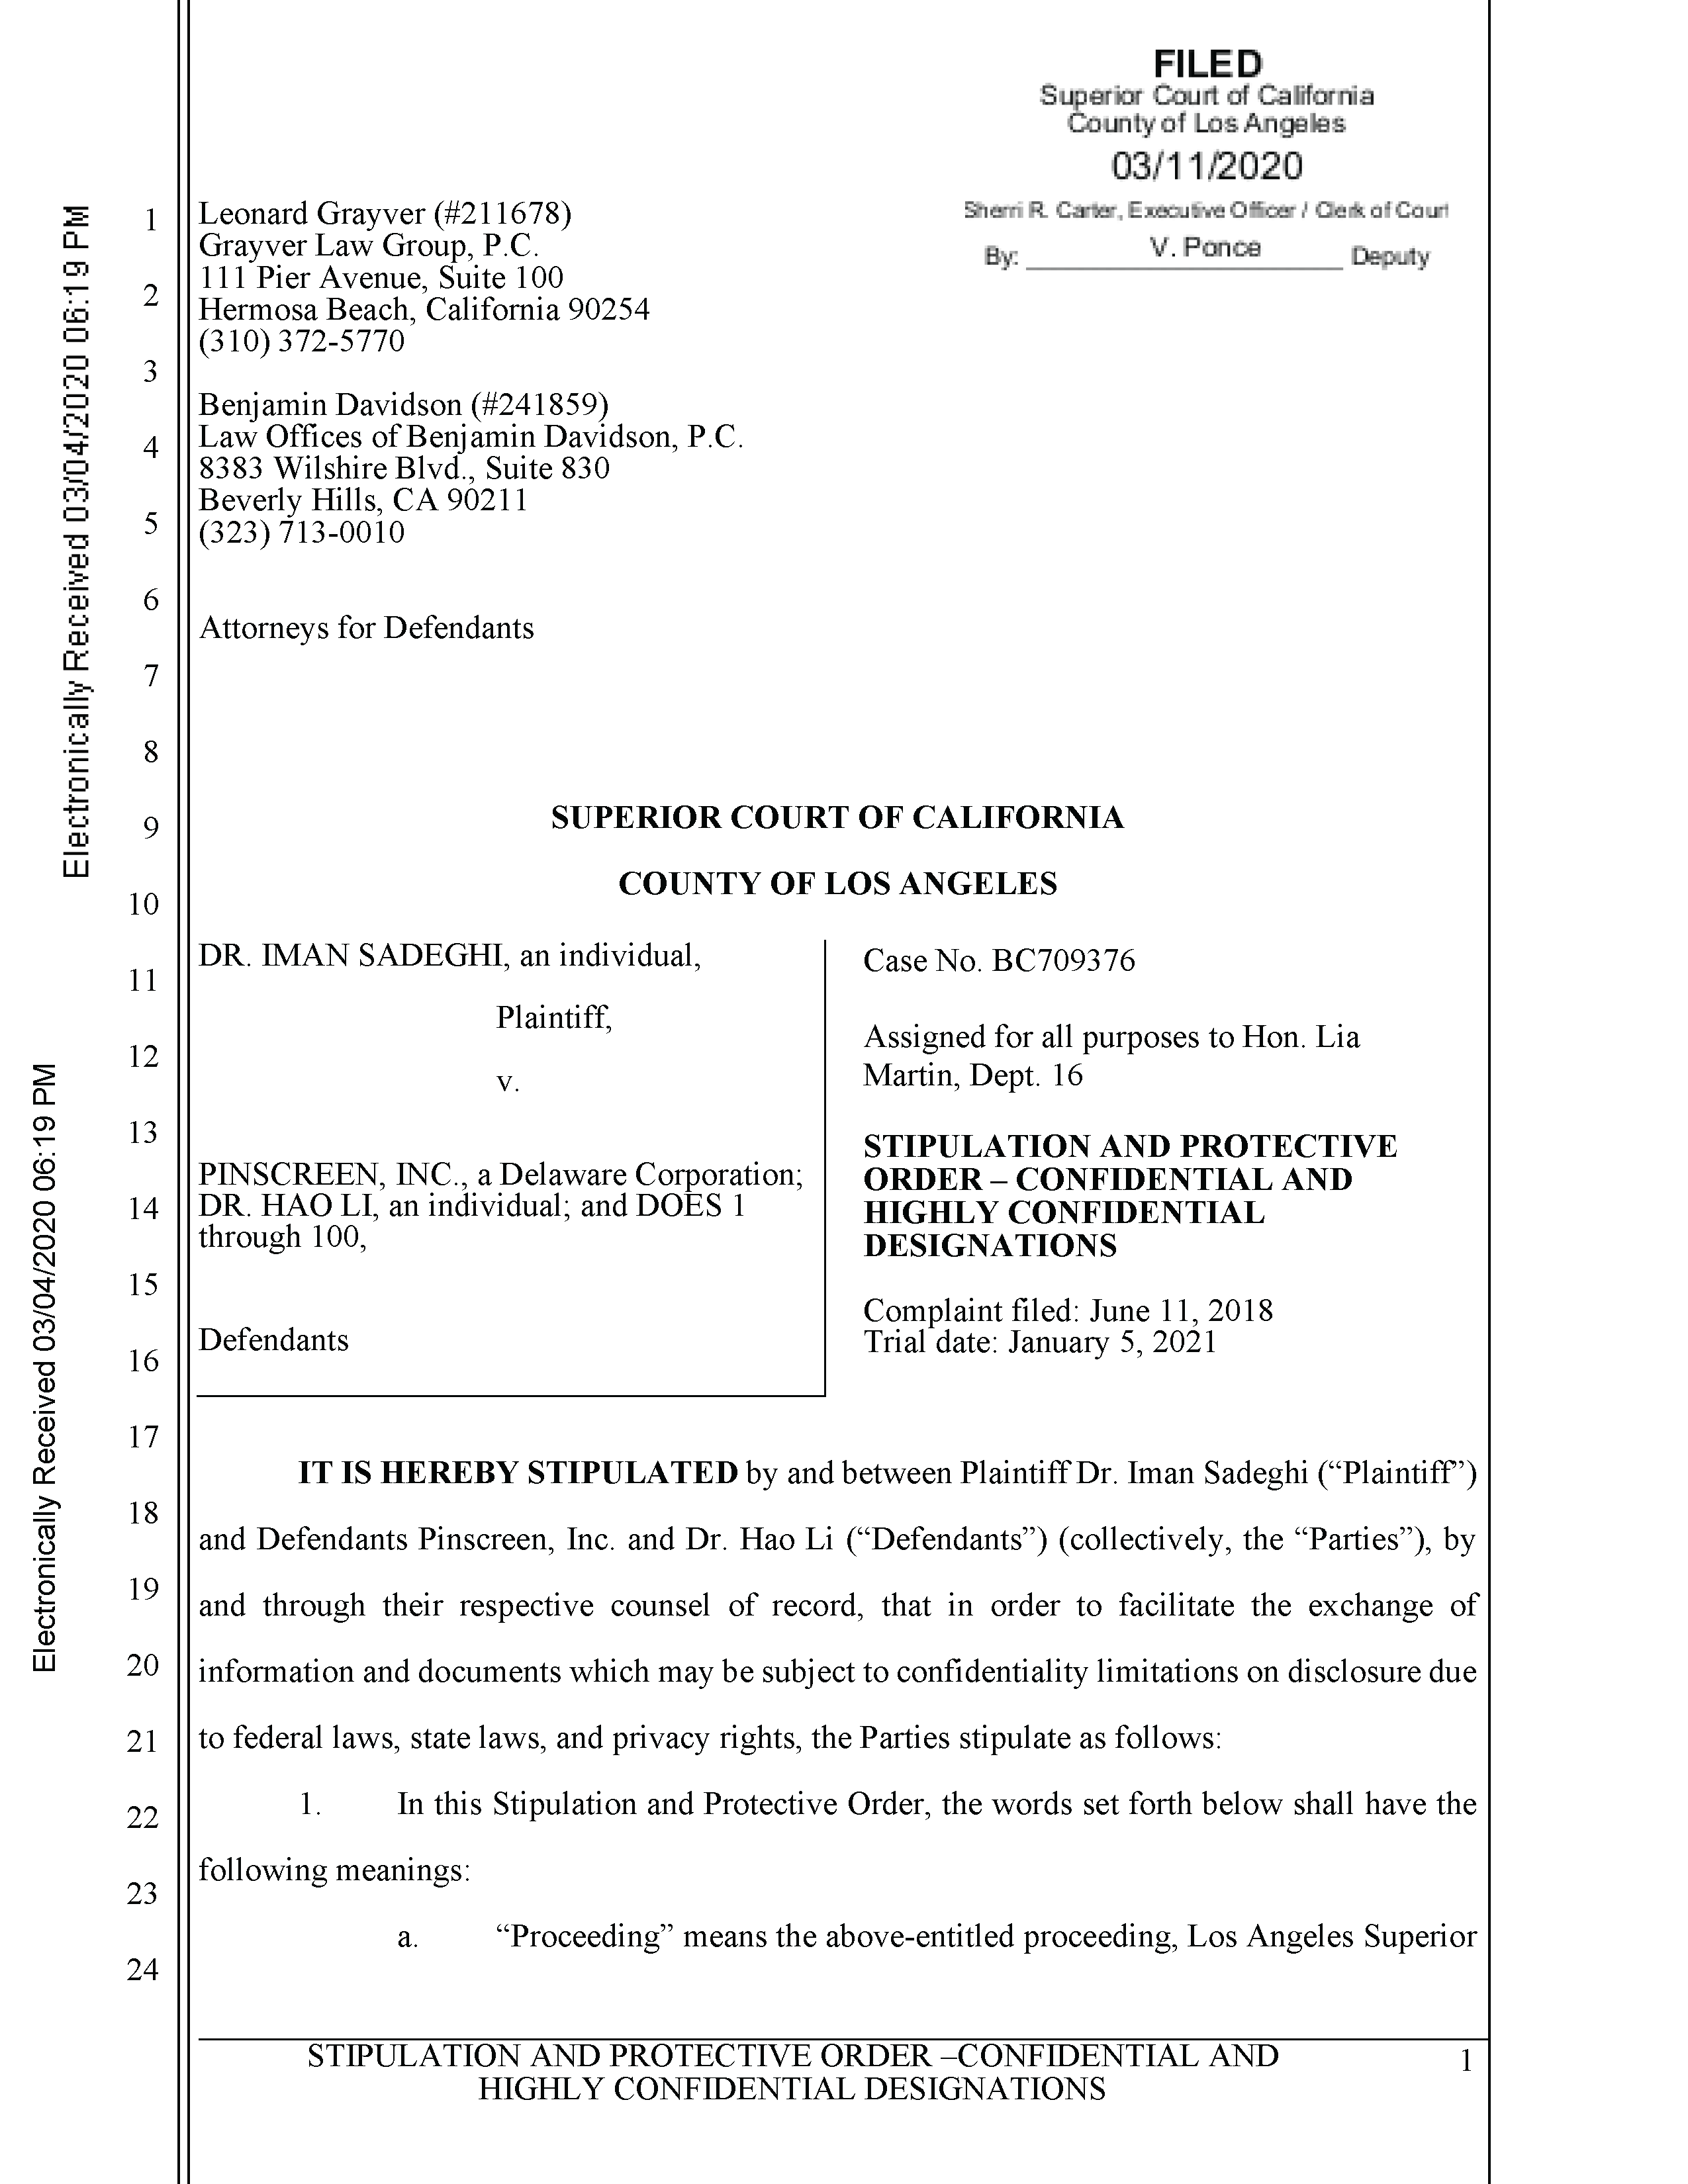 Pinscreen’s Motion to Seal USC’s Investigation of Hao Li’s Scientific Misconduct Page 69